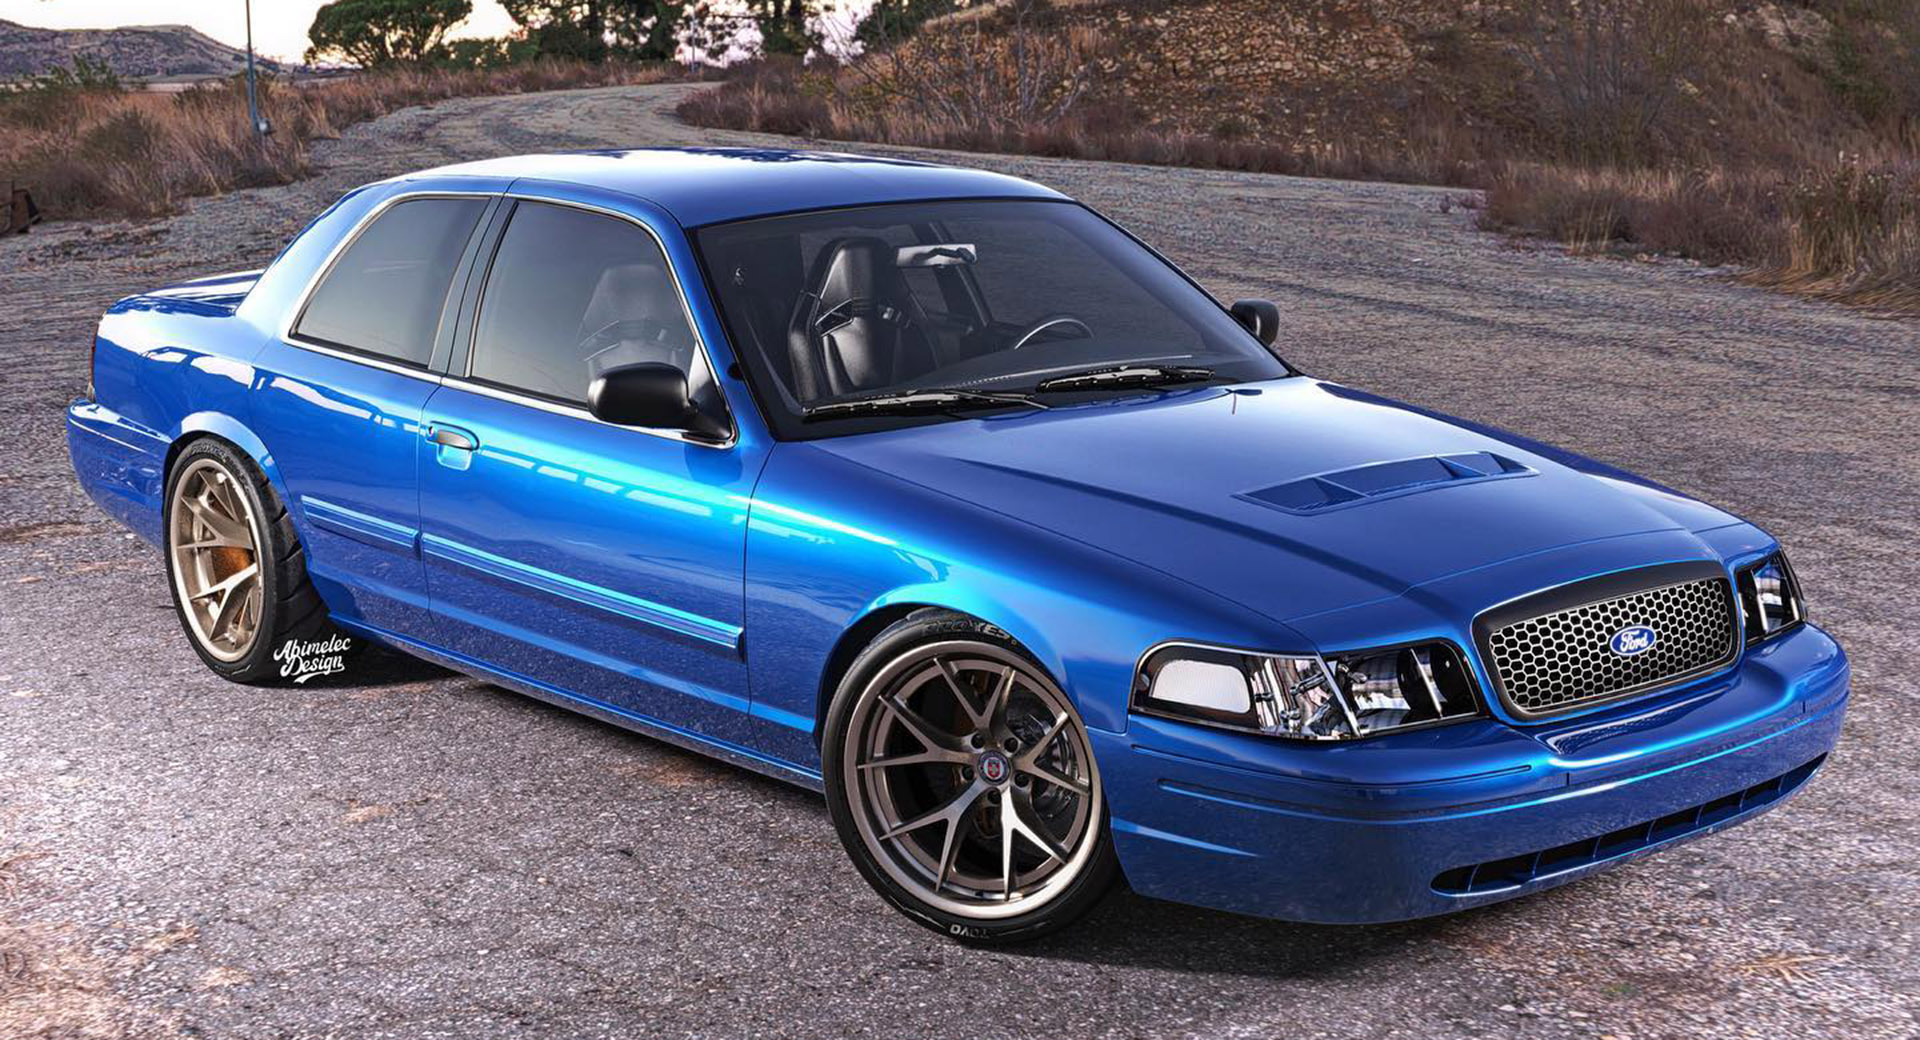 TwoDoor Crown Victoria Render Is The Definition Of Muscle Car Carscoops